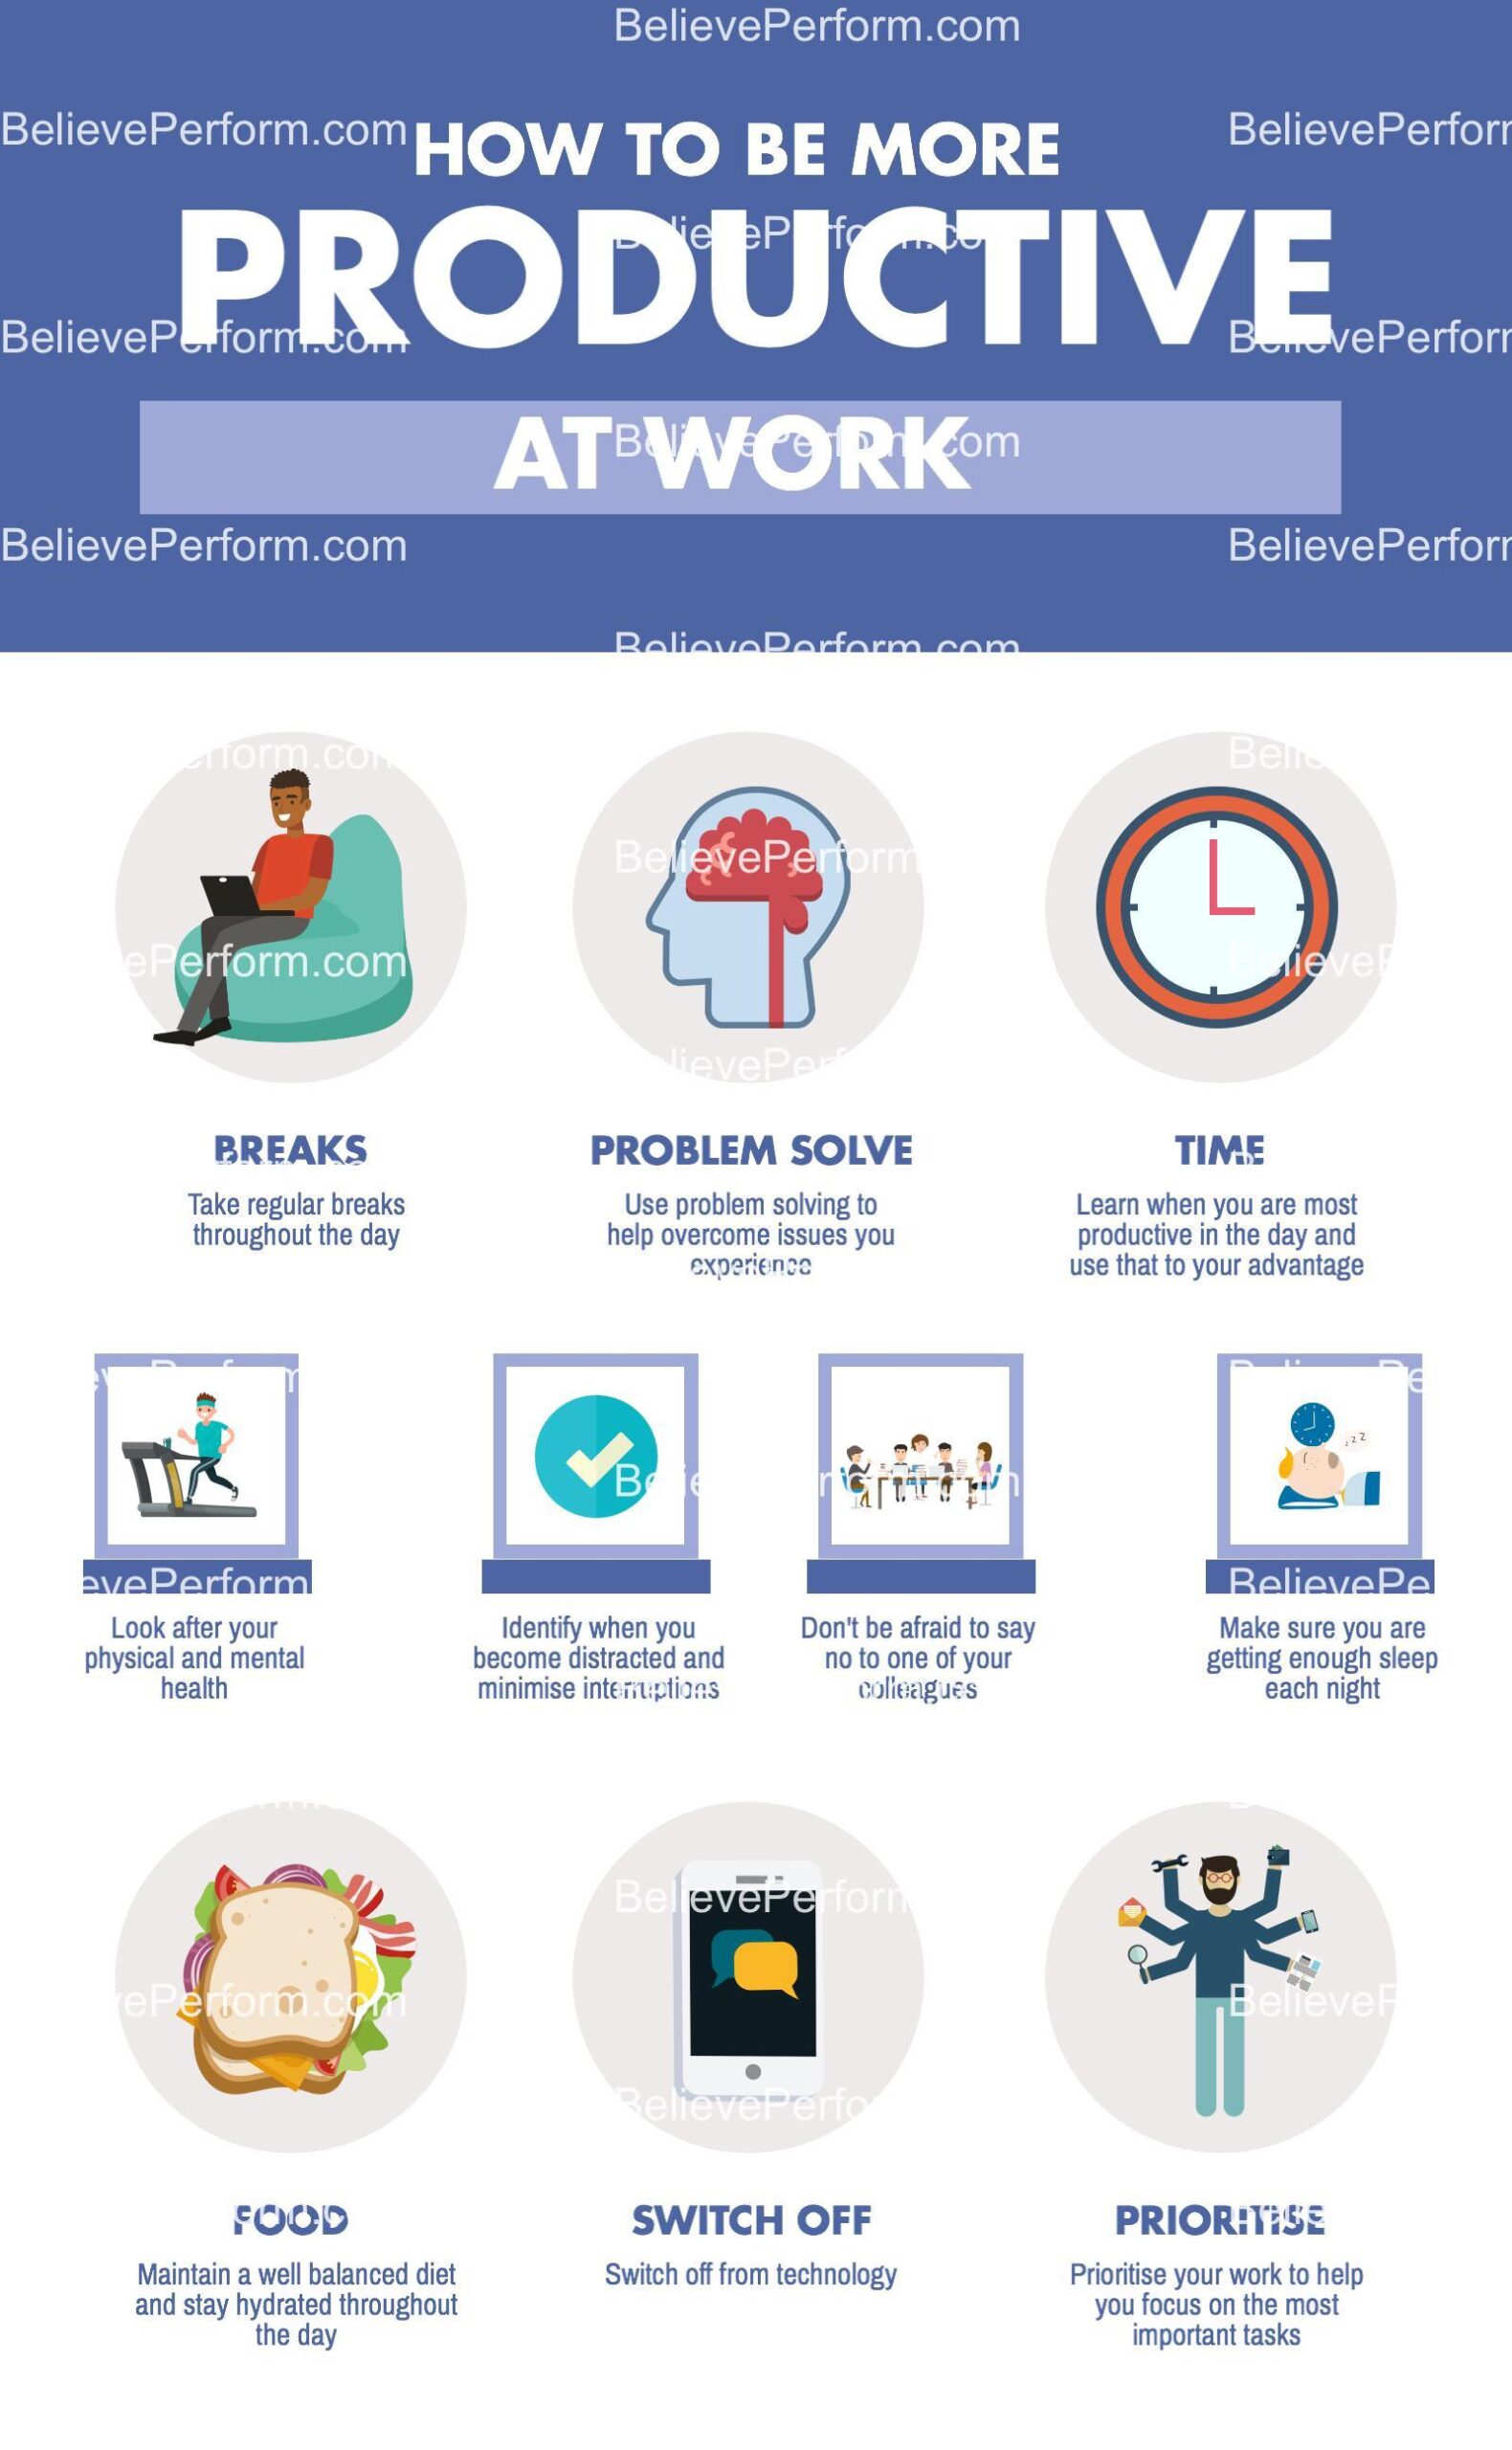 How to be more productive at work - BelievePerform - The UK's leading ...